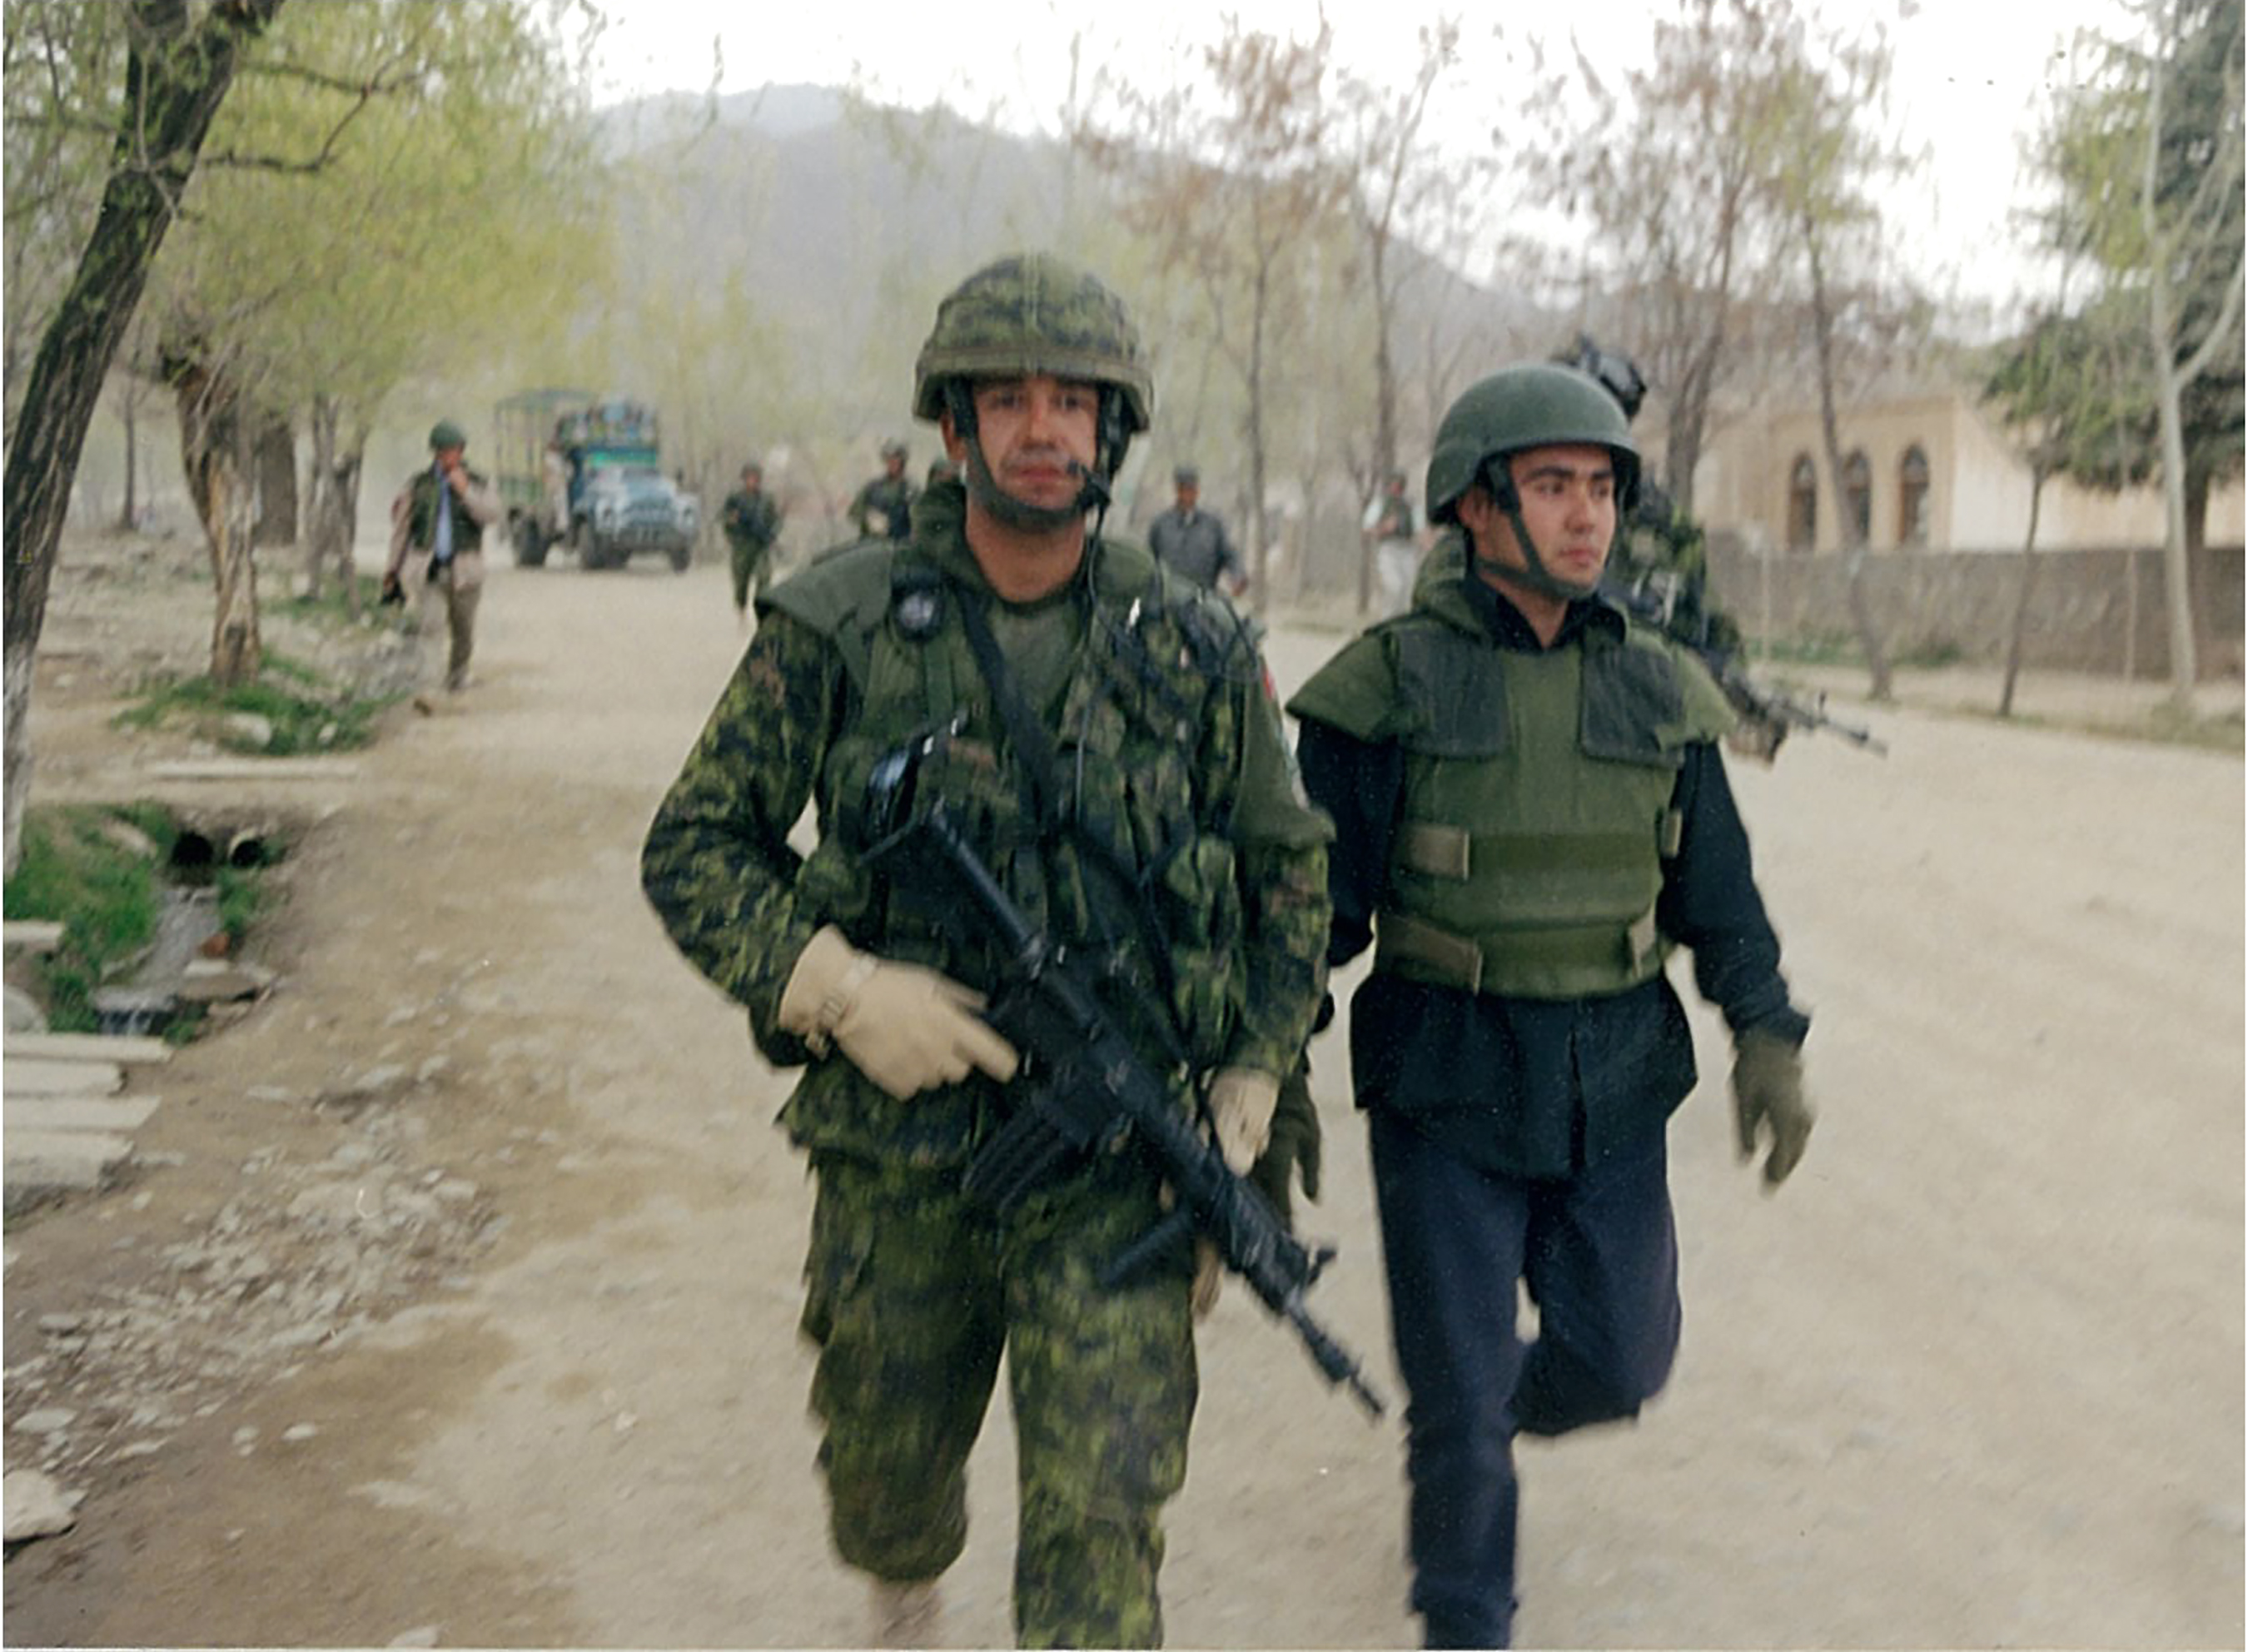 Kevin Weedmark took this photo in Aftghanistan while on a CIDA project. It shows soldiers on patrol in a village outside Kabul.